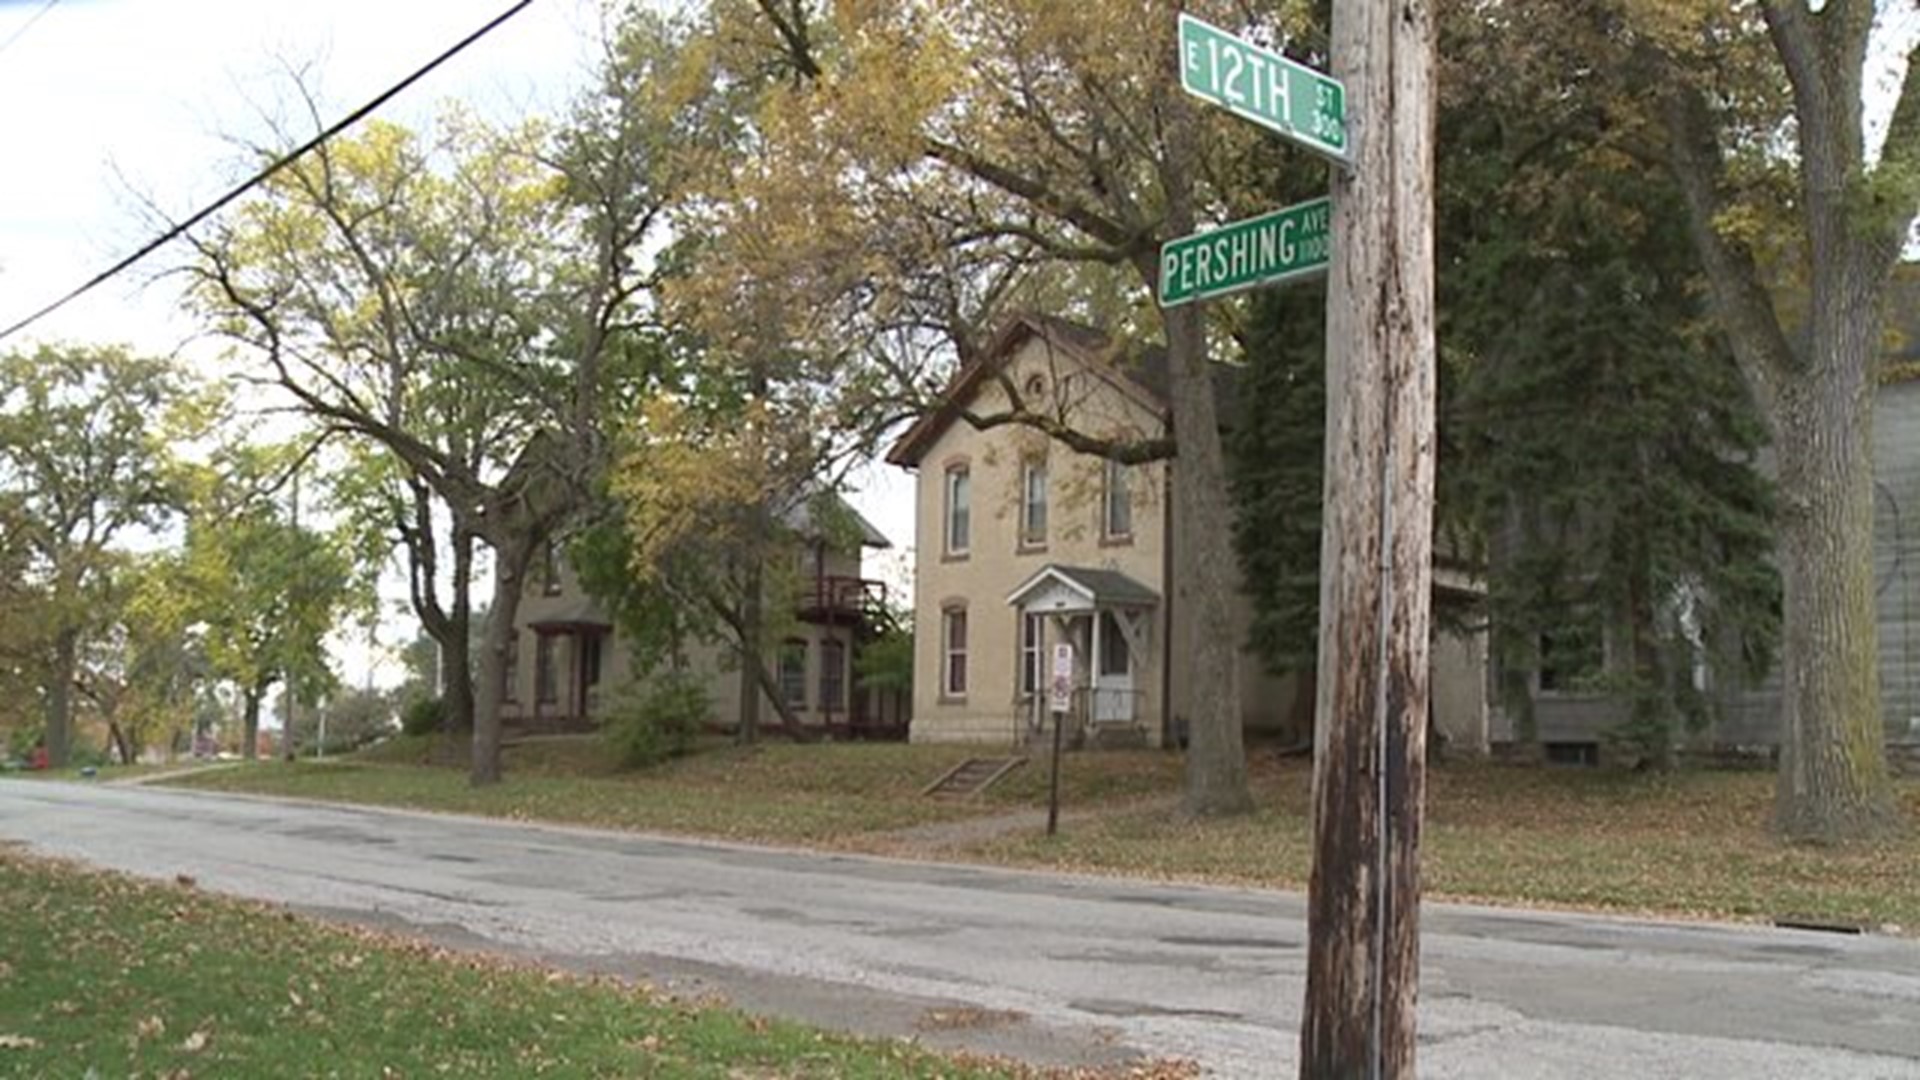 Palmer Chiropractic plans to demolish four historic homes